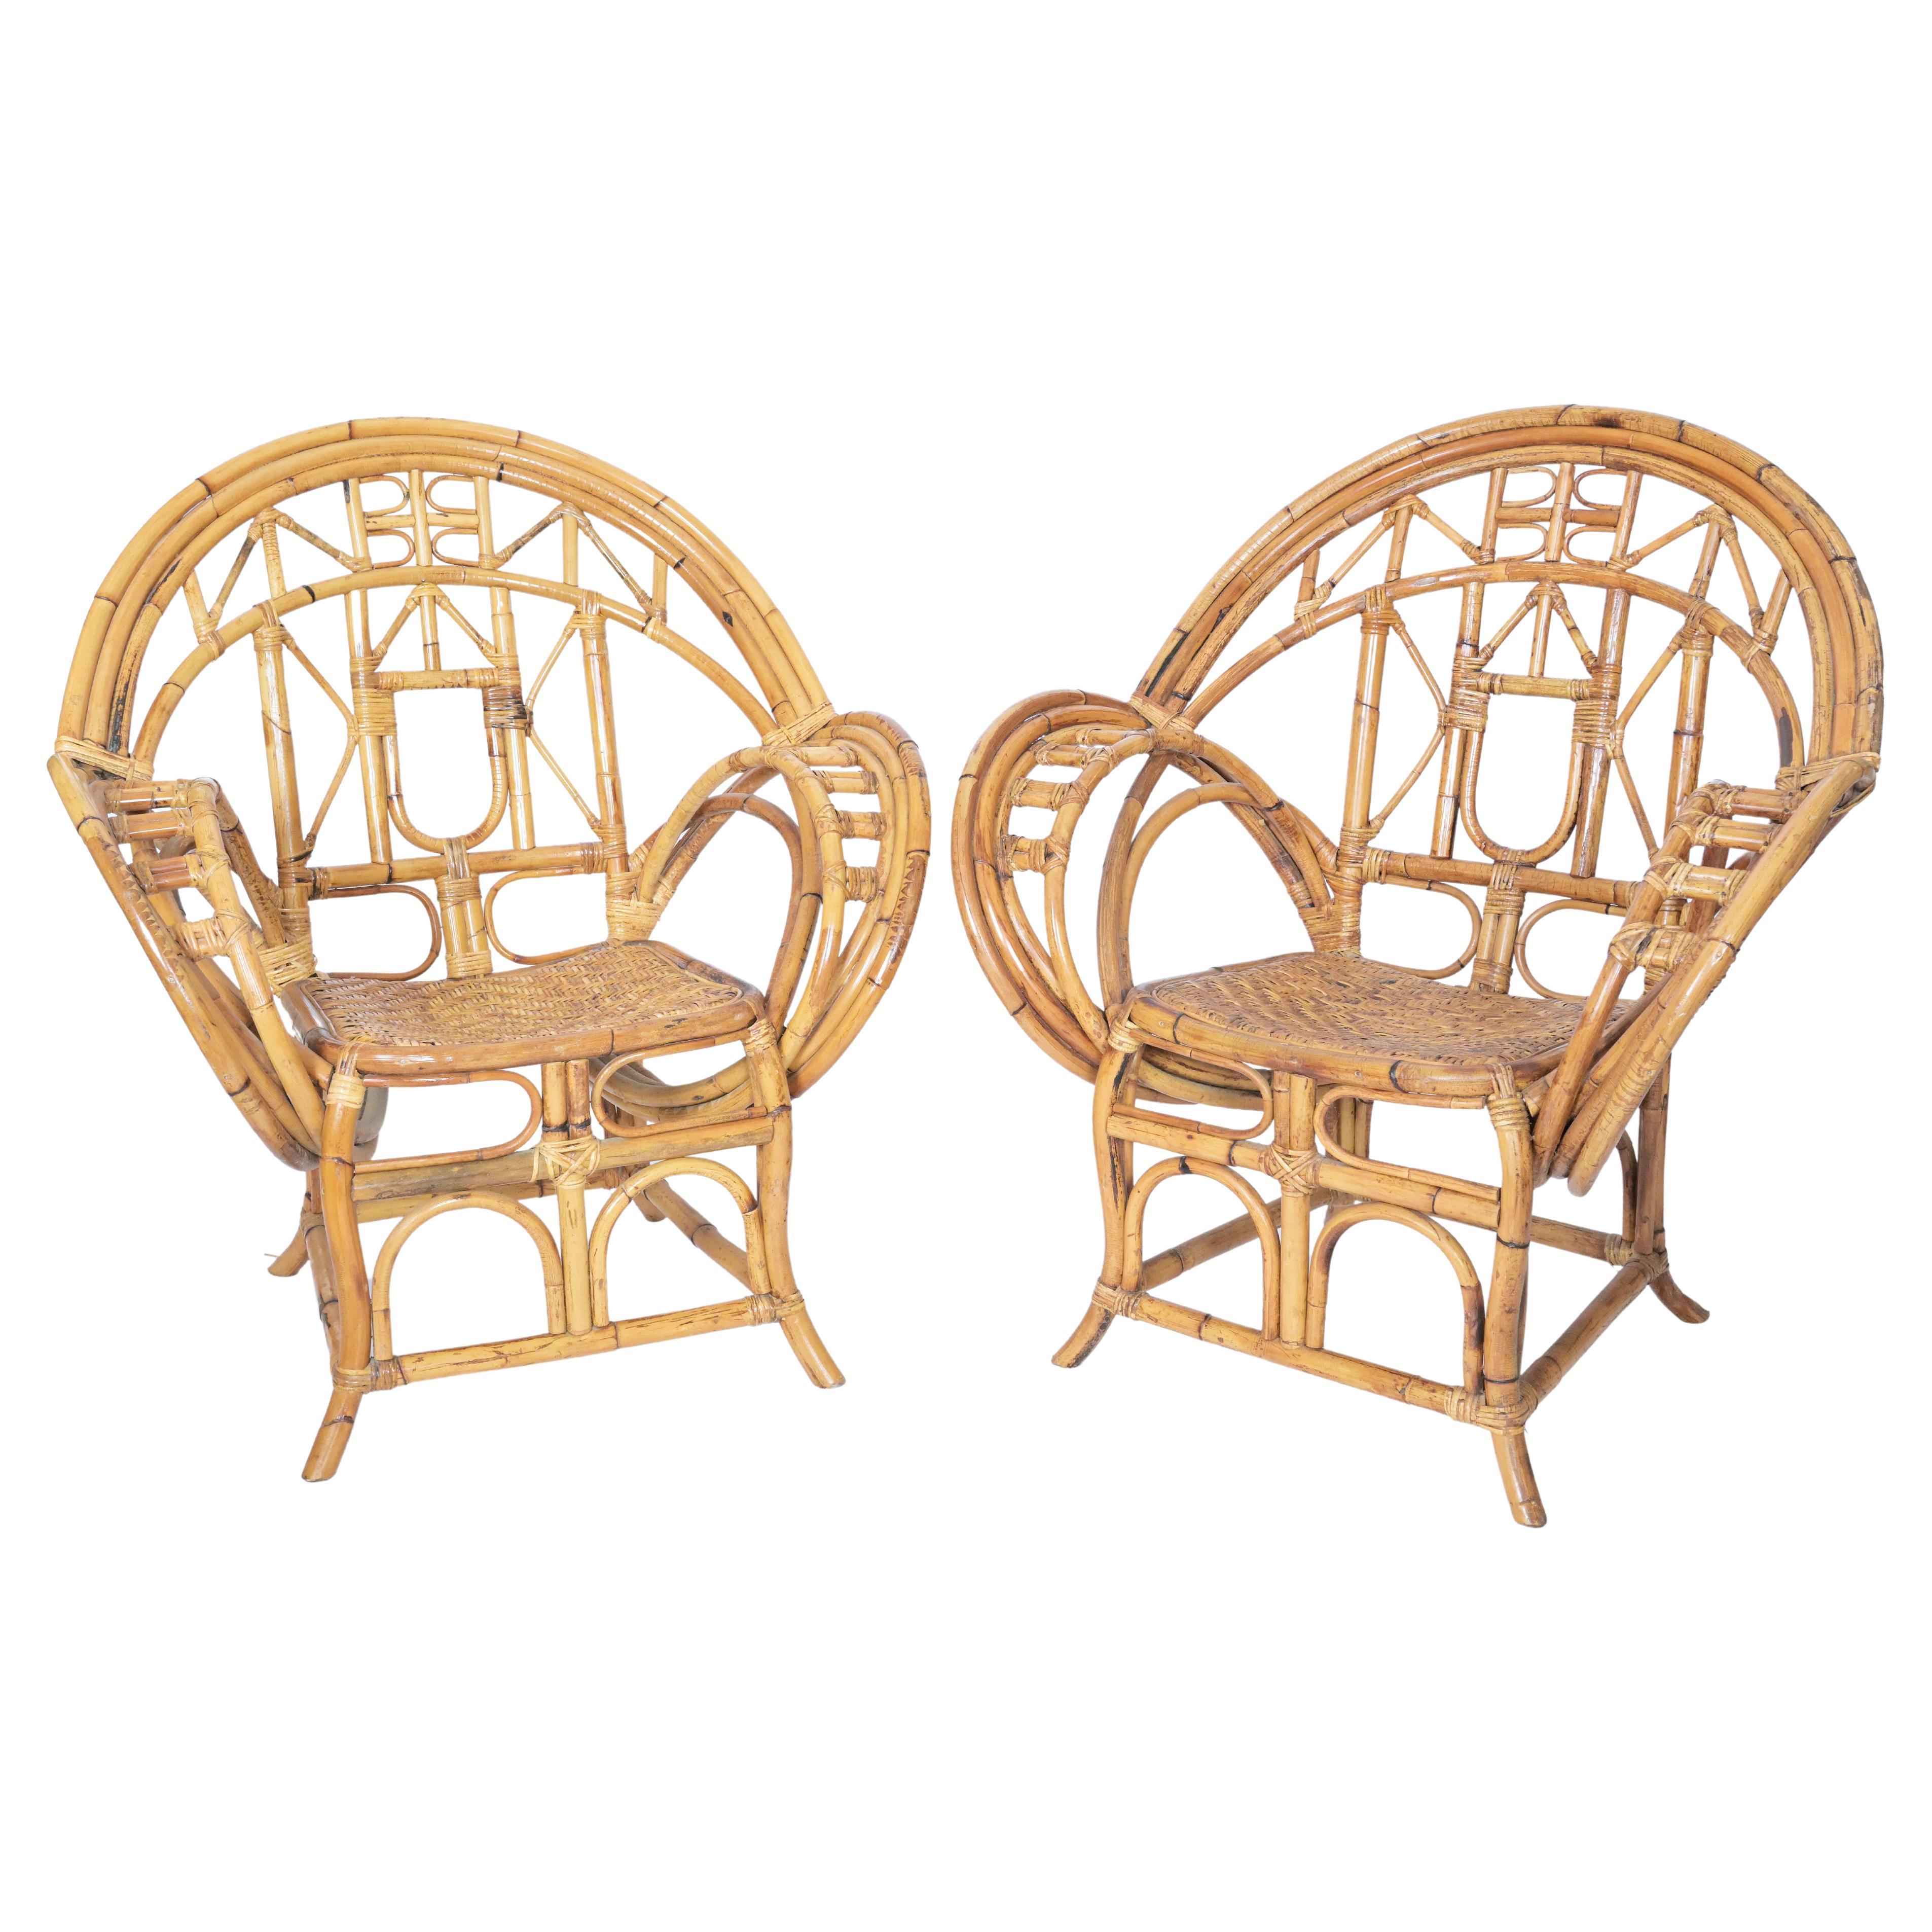 Pair of Mid-Century Modern Bamboo Caned Armchairs